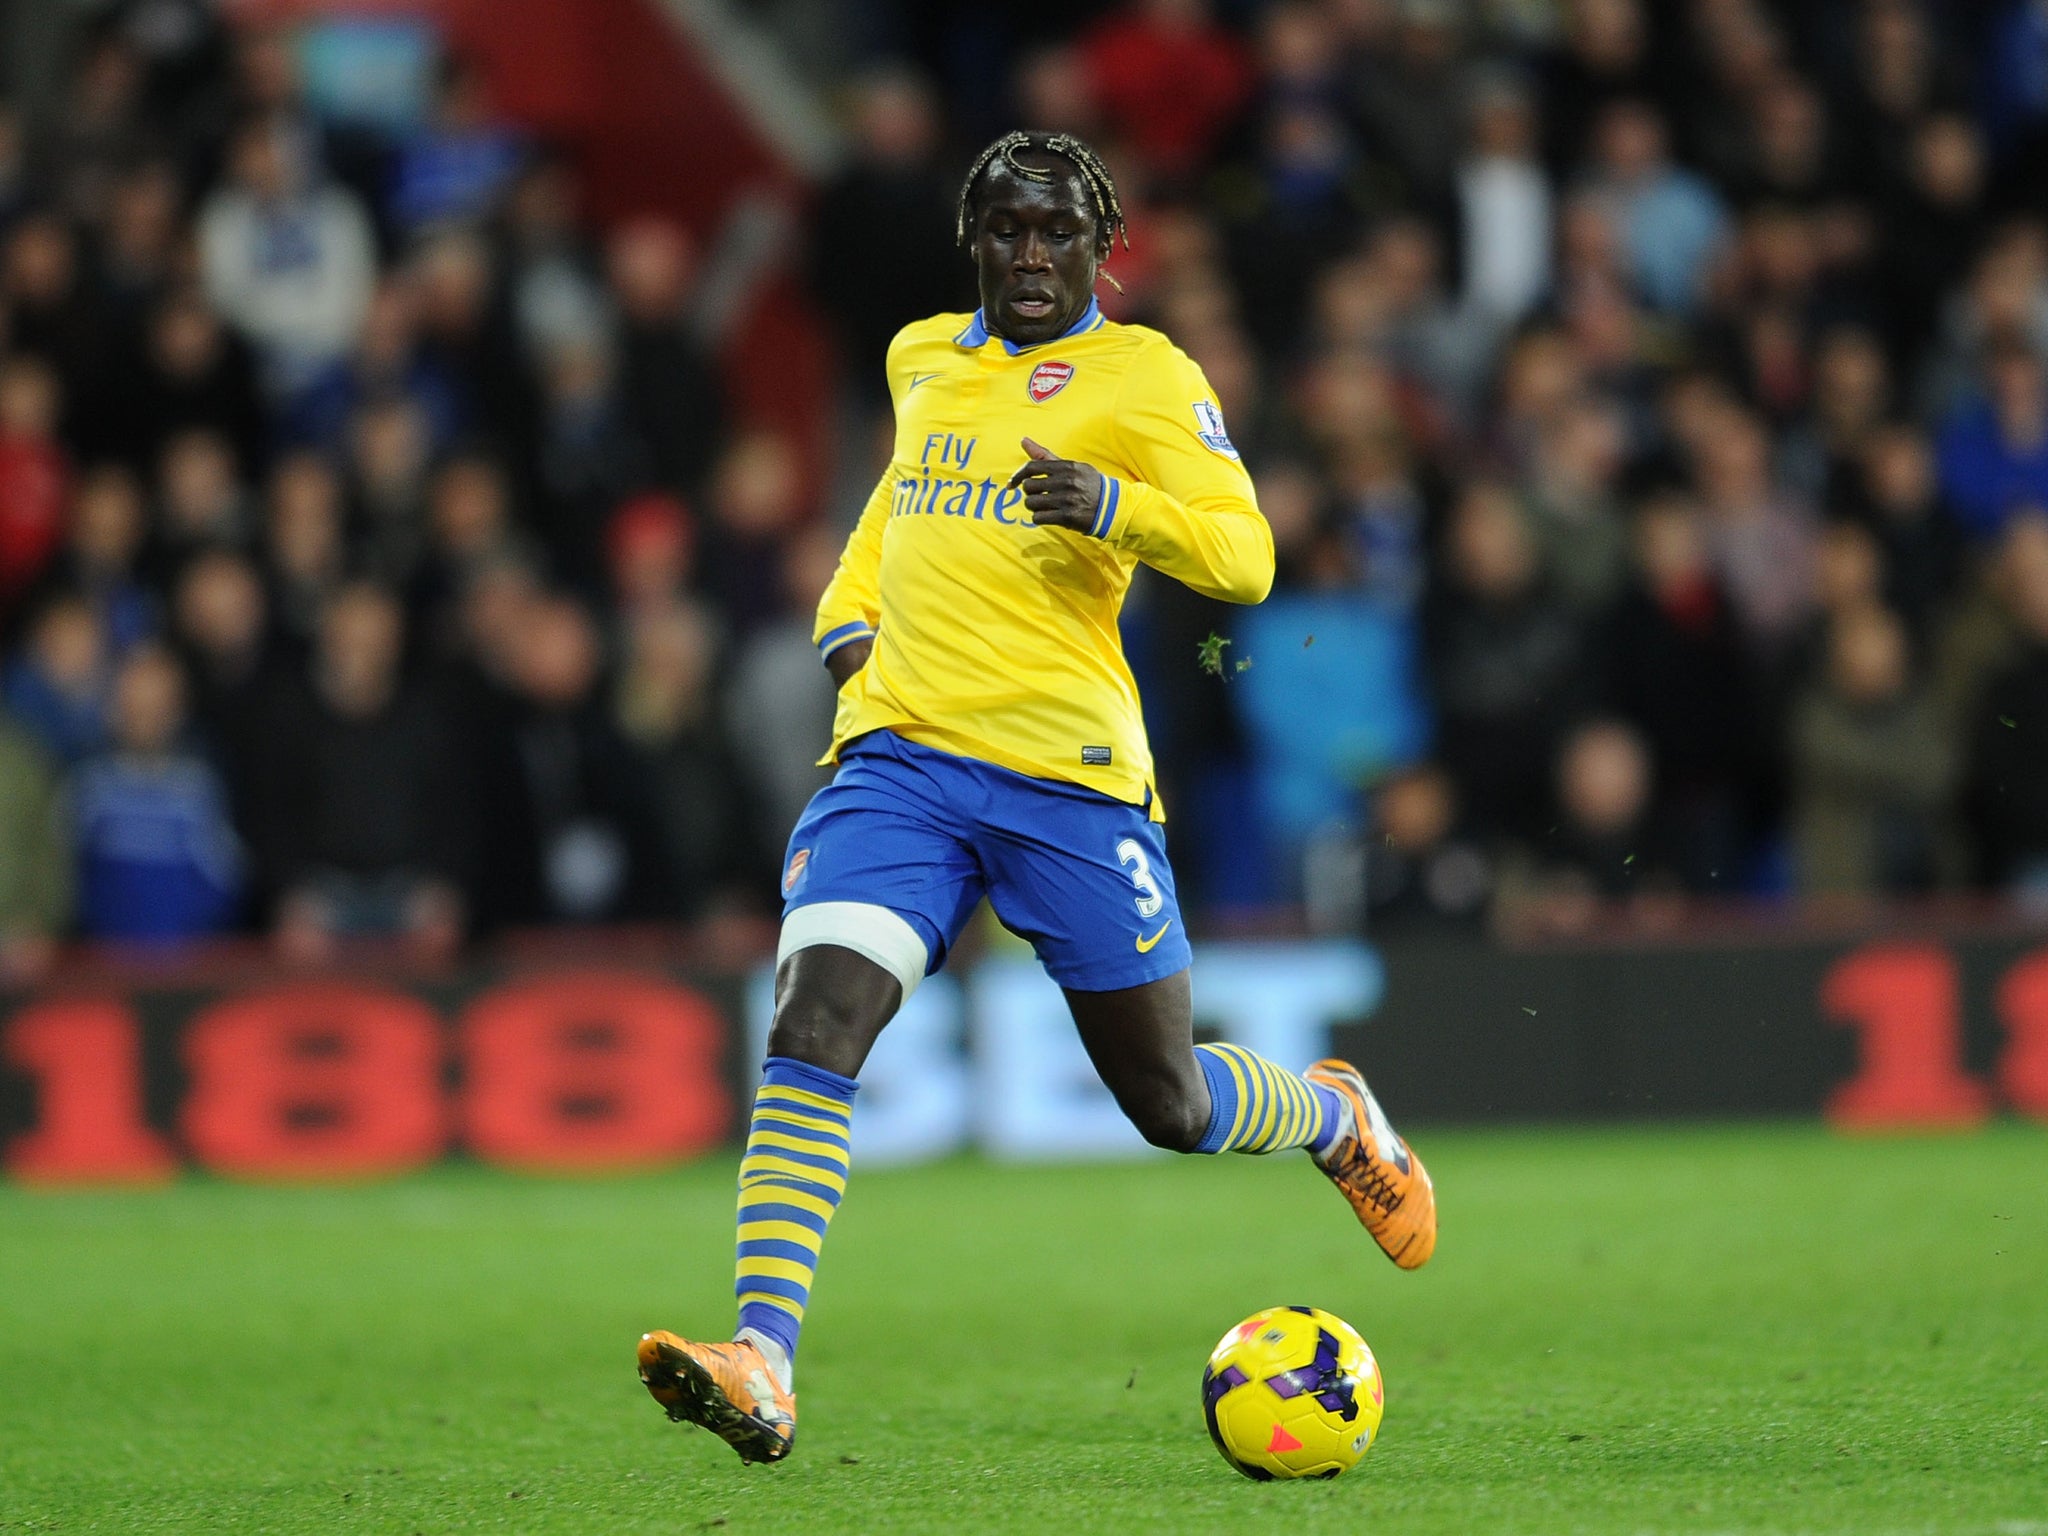 Arsene Wenger has confirmed that Bacary Sagna will miss tomorrow's Premier League match against Hull